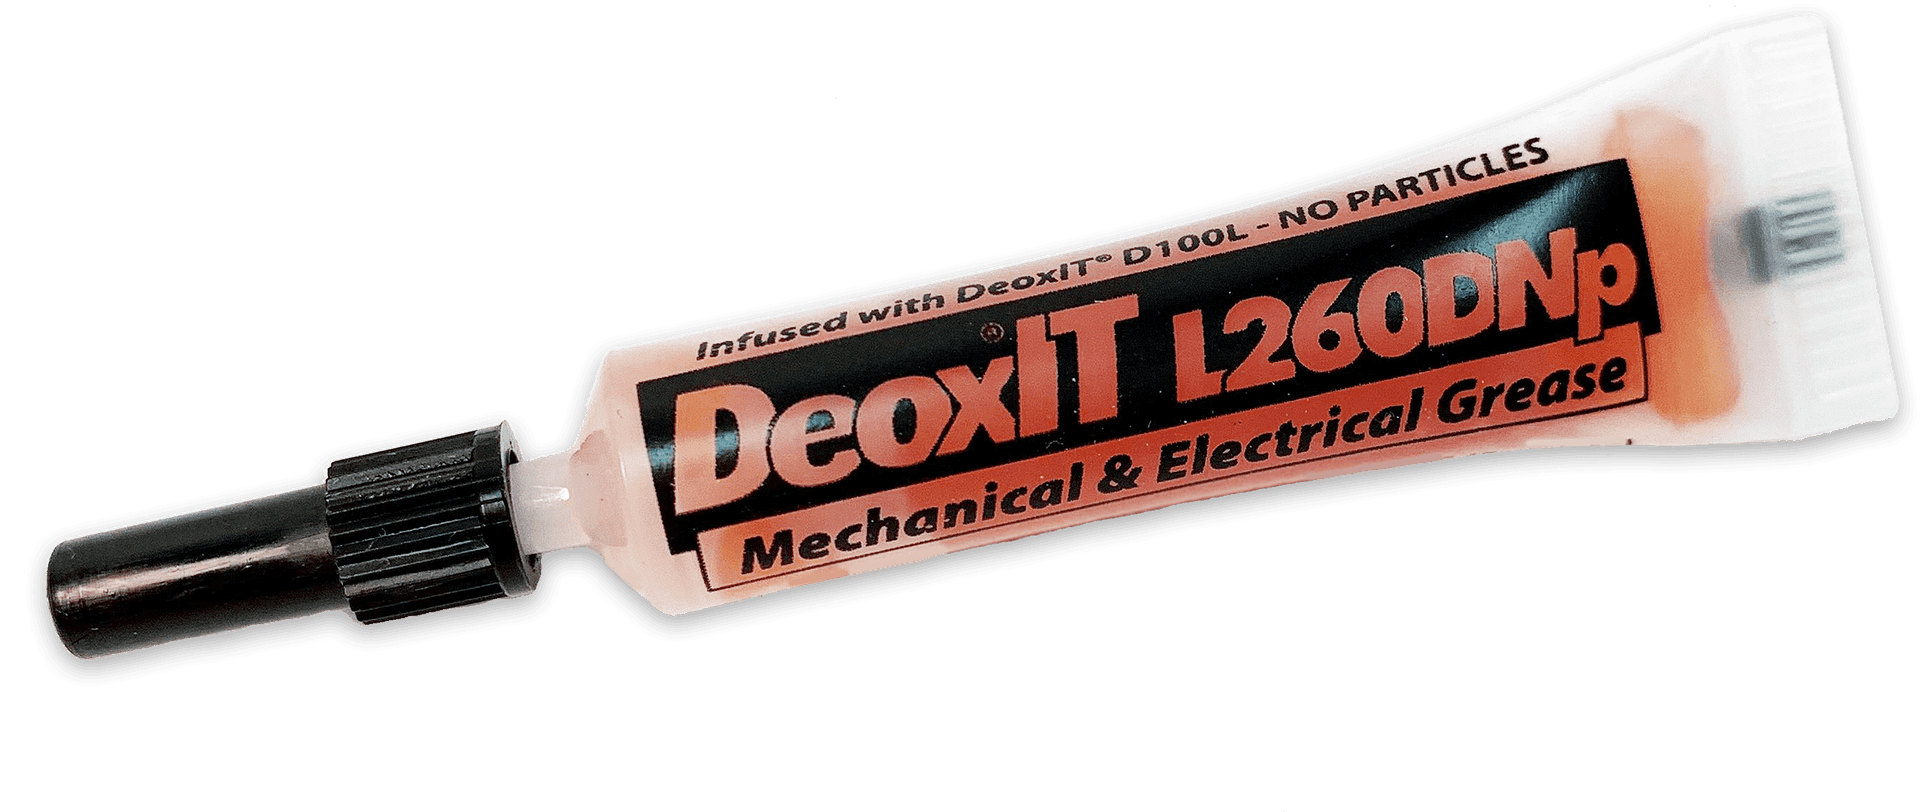 Deox I T L260 Dn P Grease Tube PNG